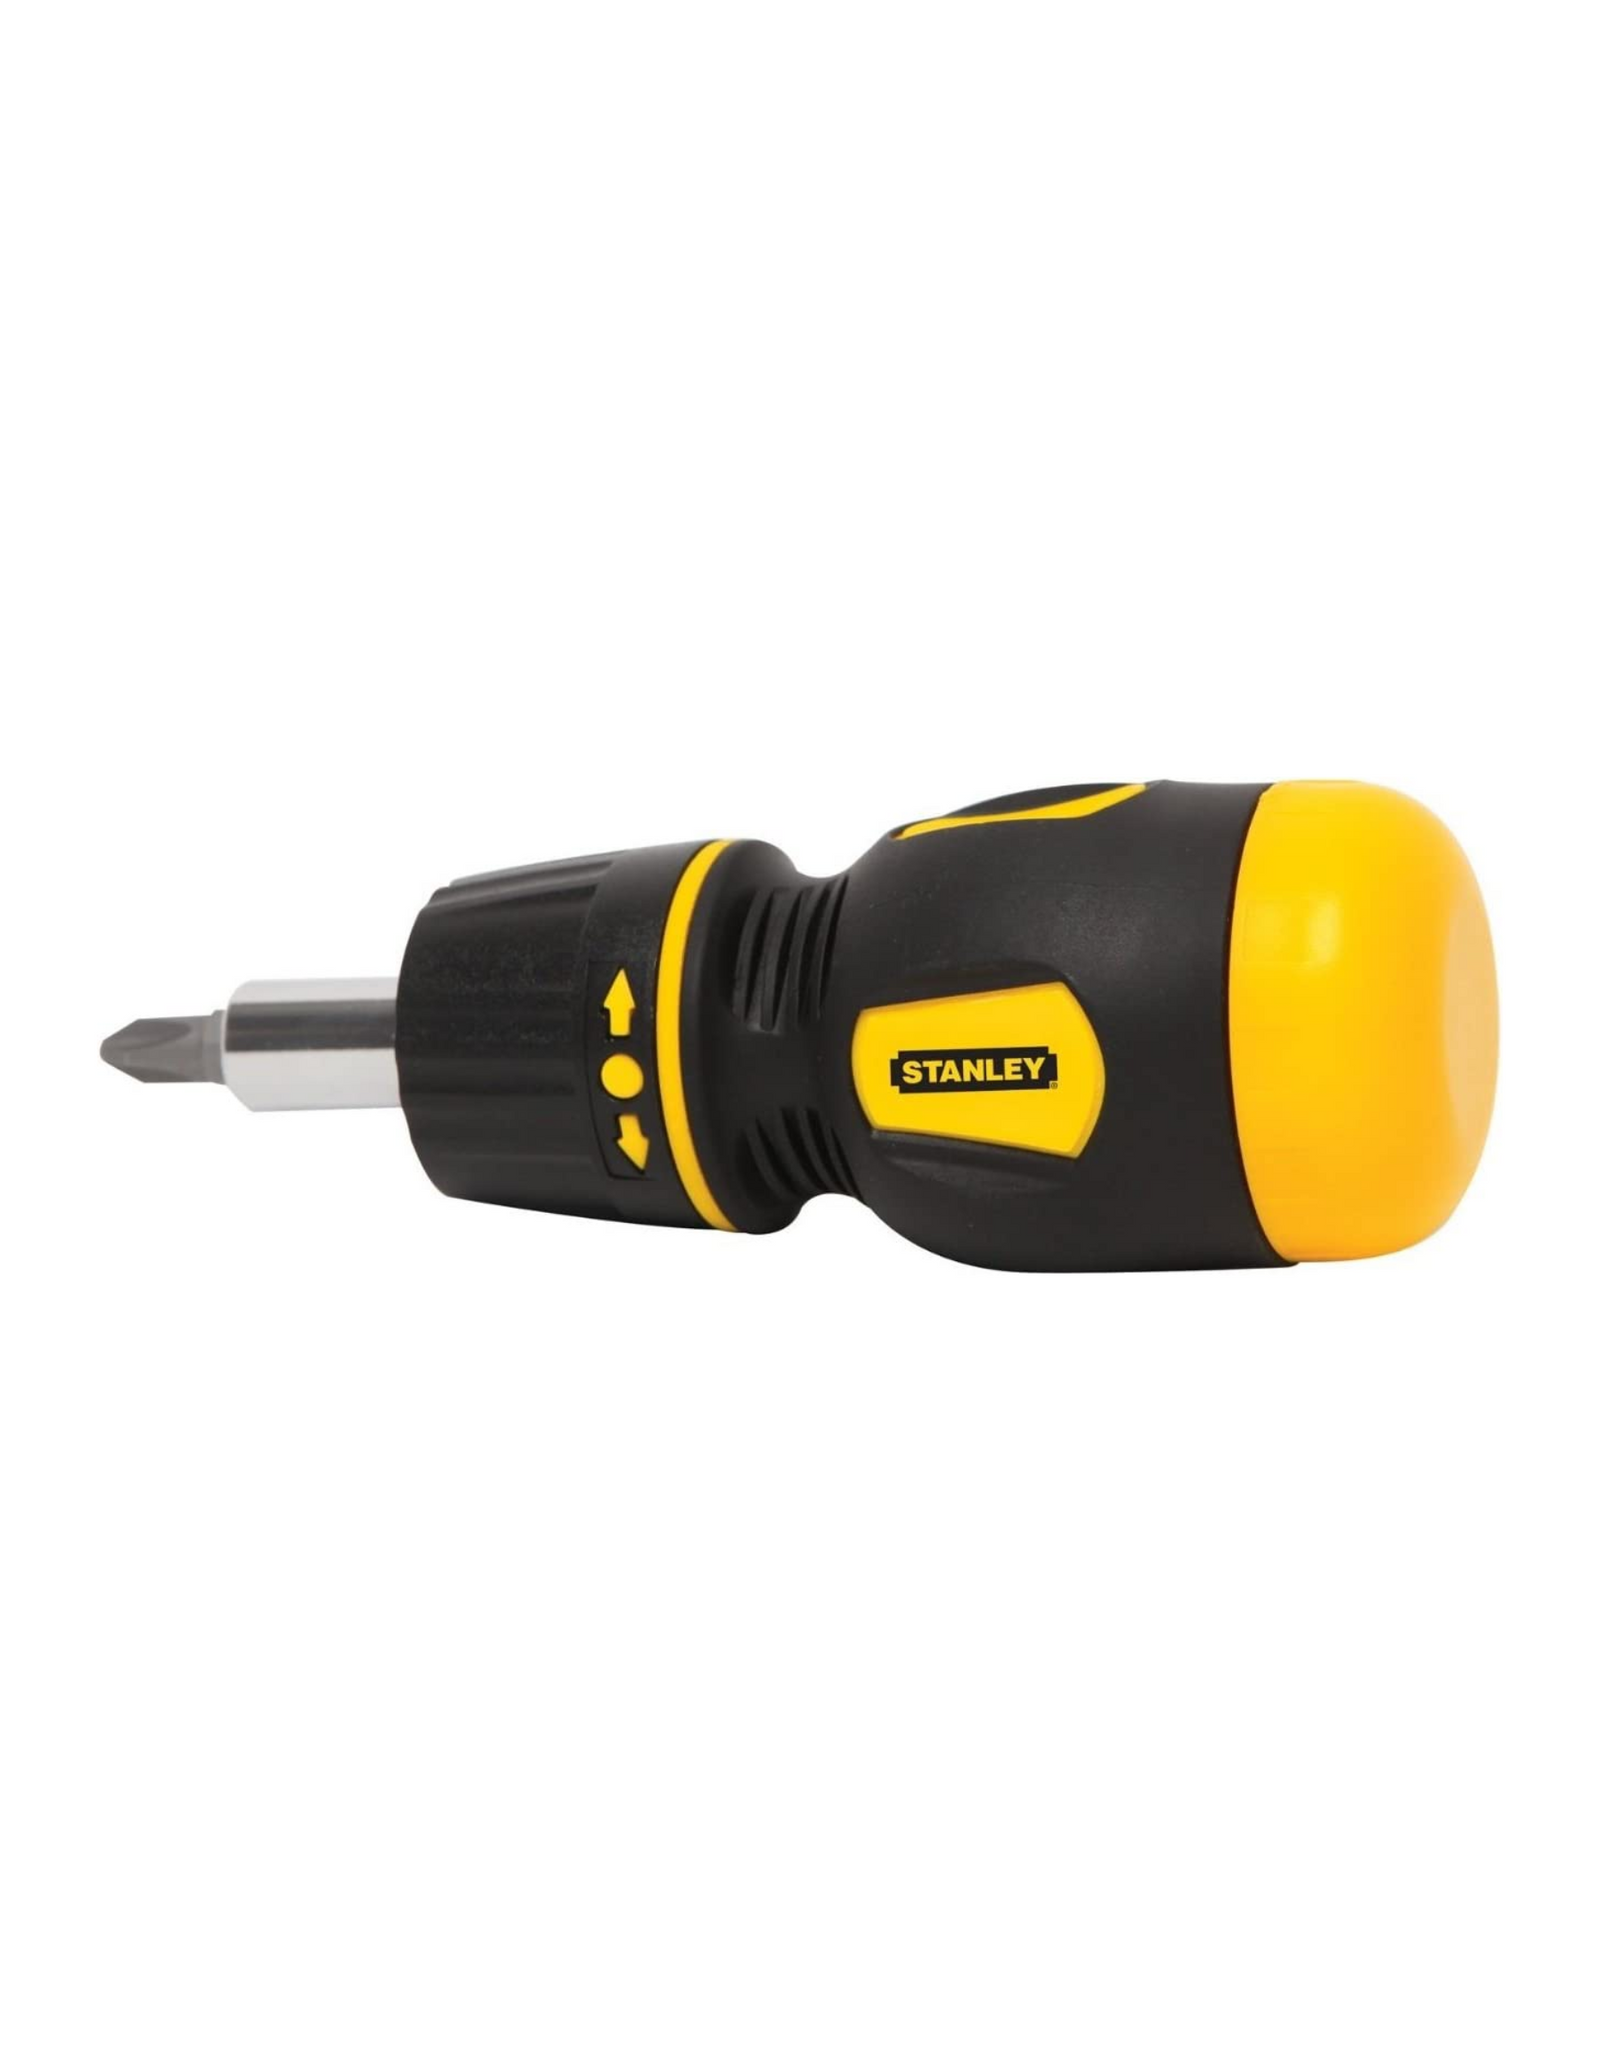 STANLEY Multi Screwdriver  (66-358), Stubby Ratcheting, Including 6 Interchangeable Bits